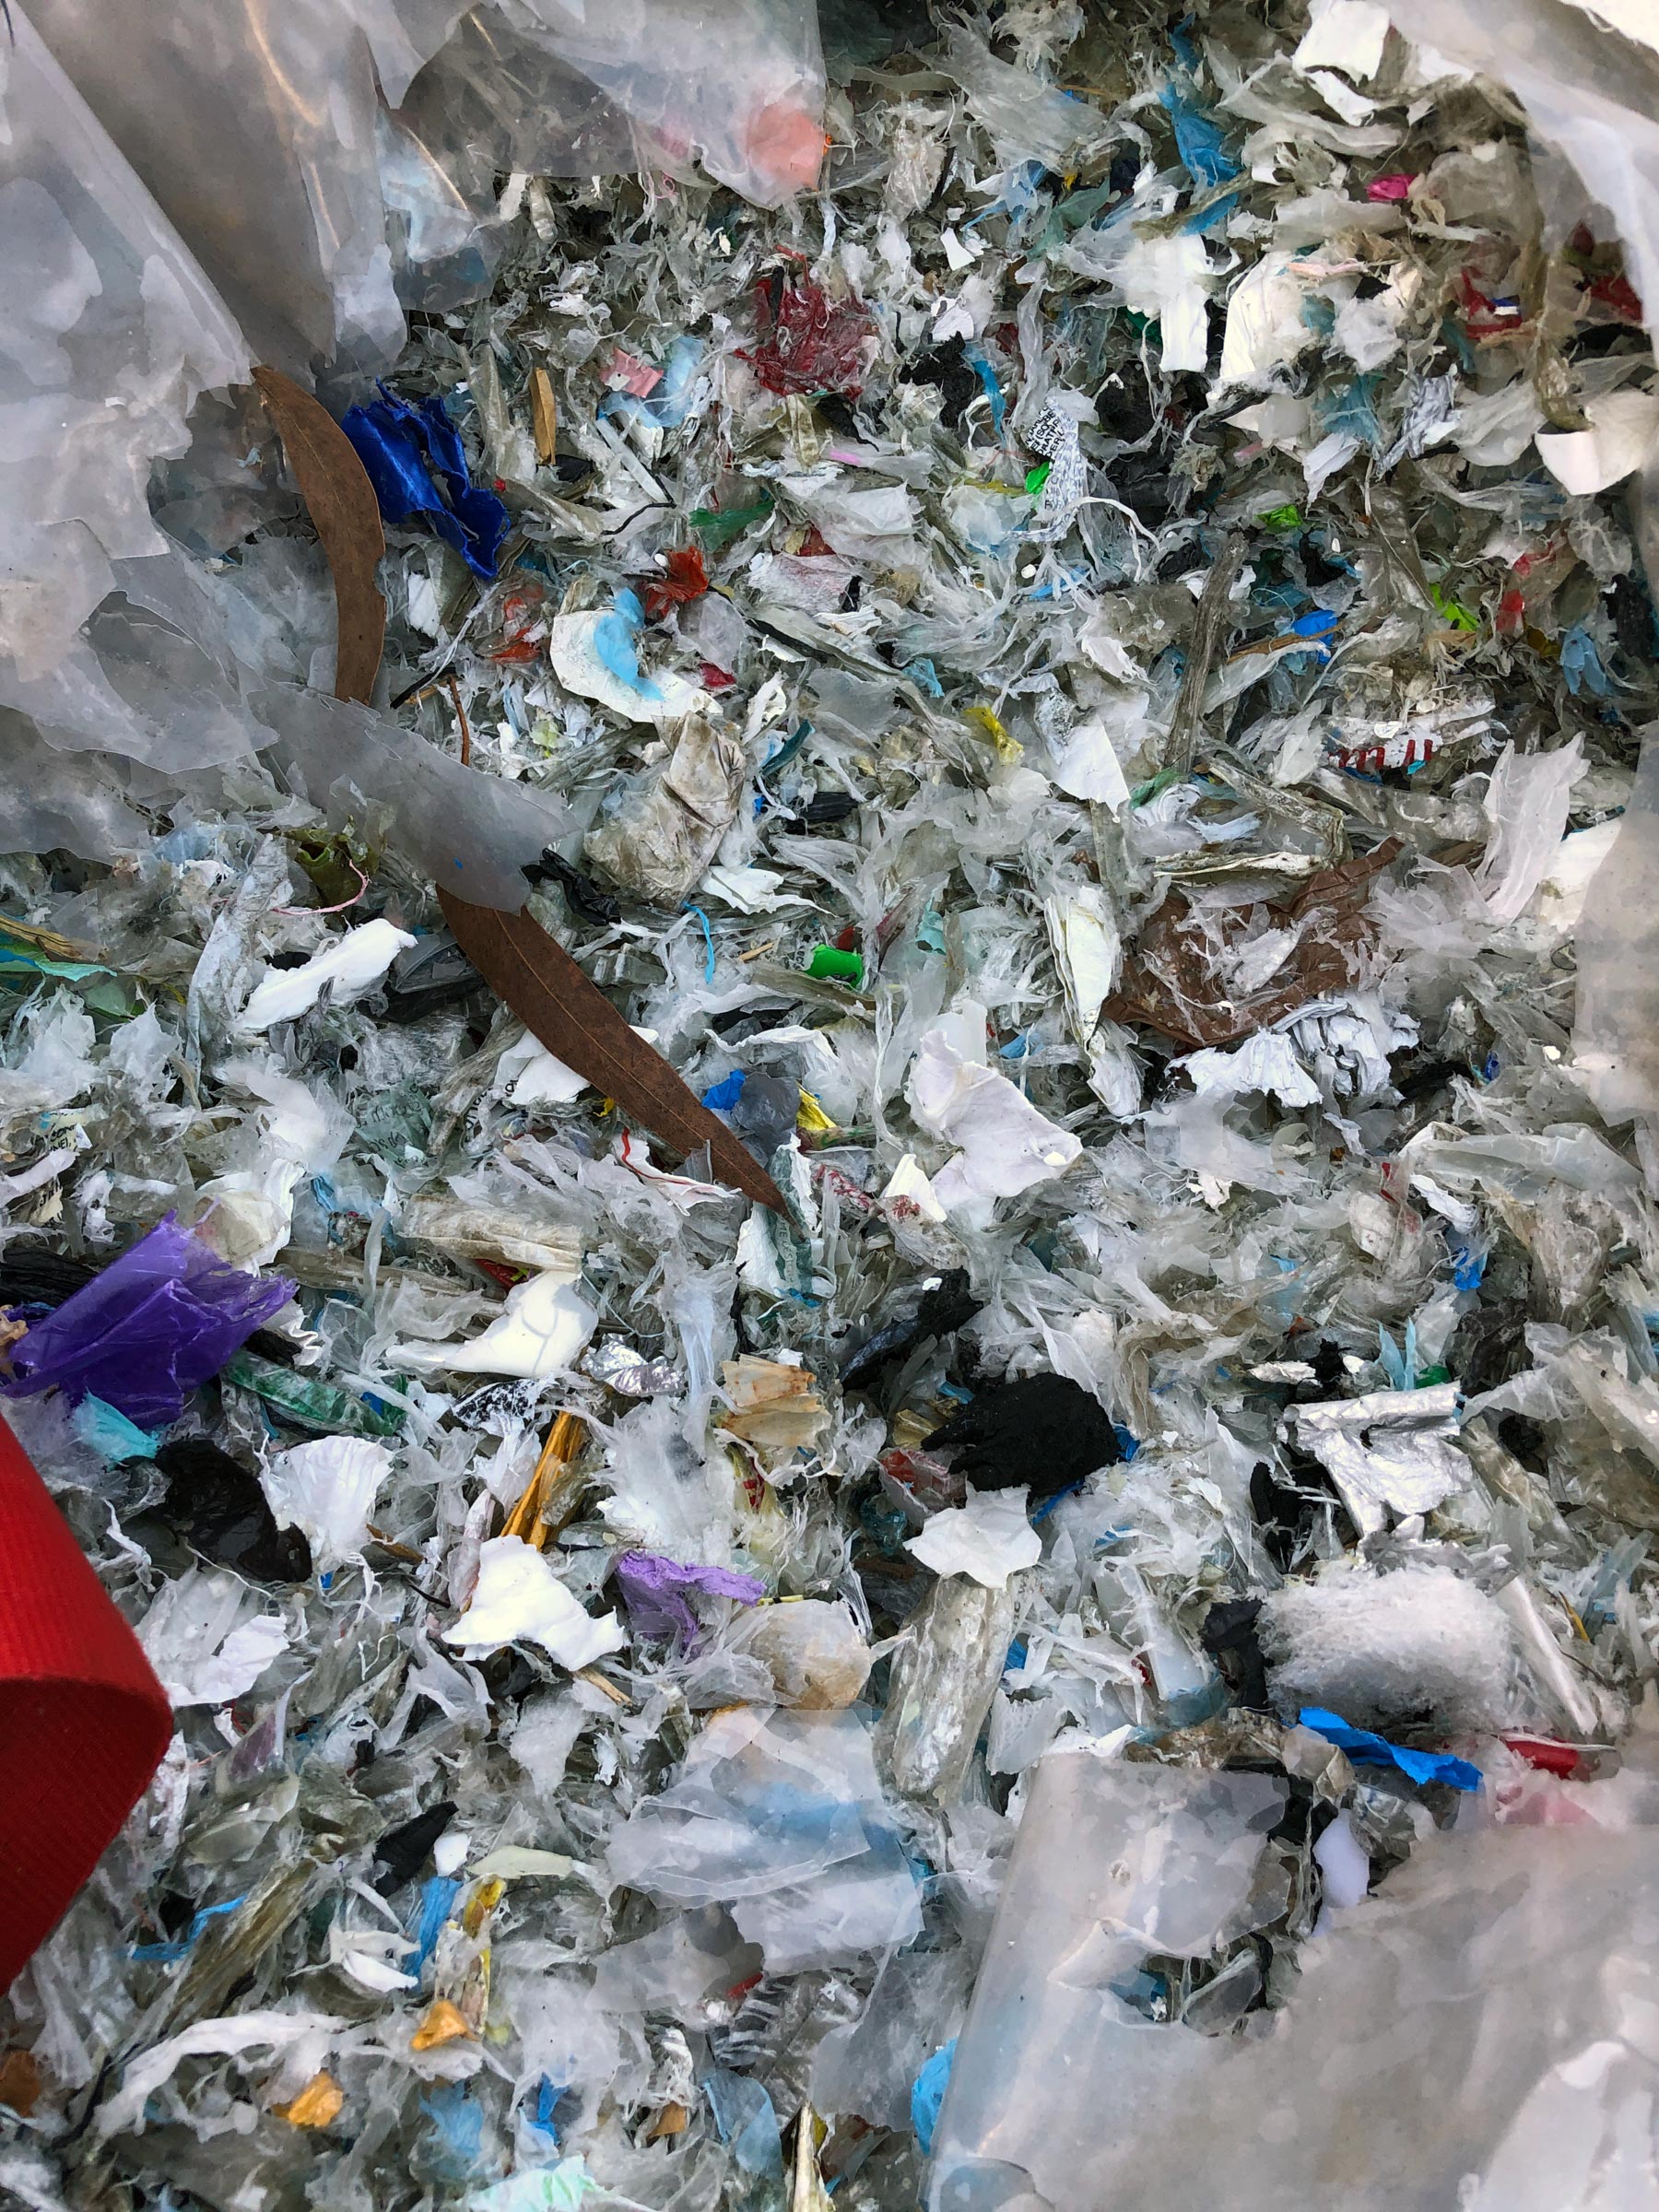 Mura and BioLogiQ join forces to develop chemical recycling in China that will protect the environment by recycling plastic that today ends up in landfills, incinerators, or waterways.